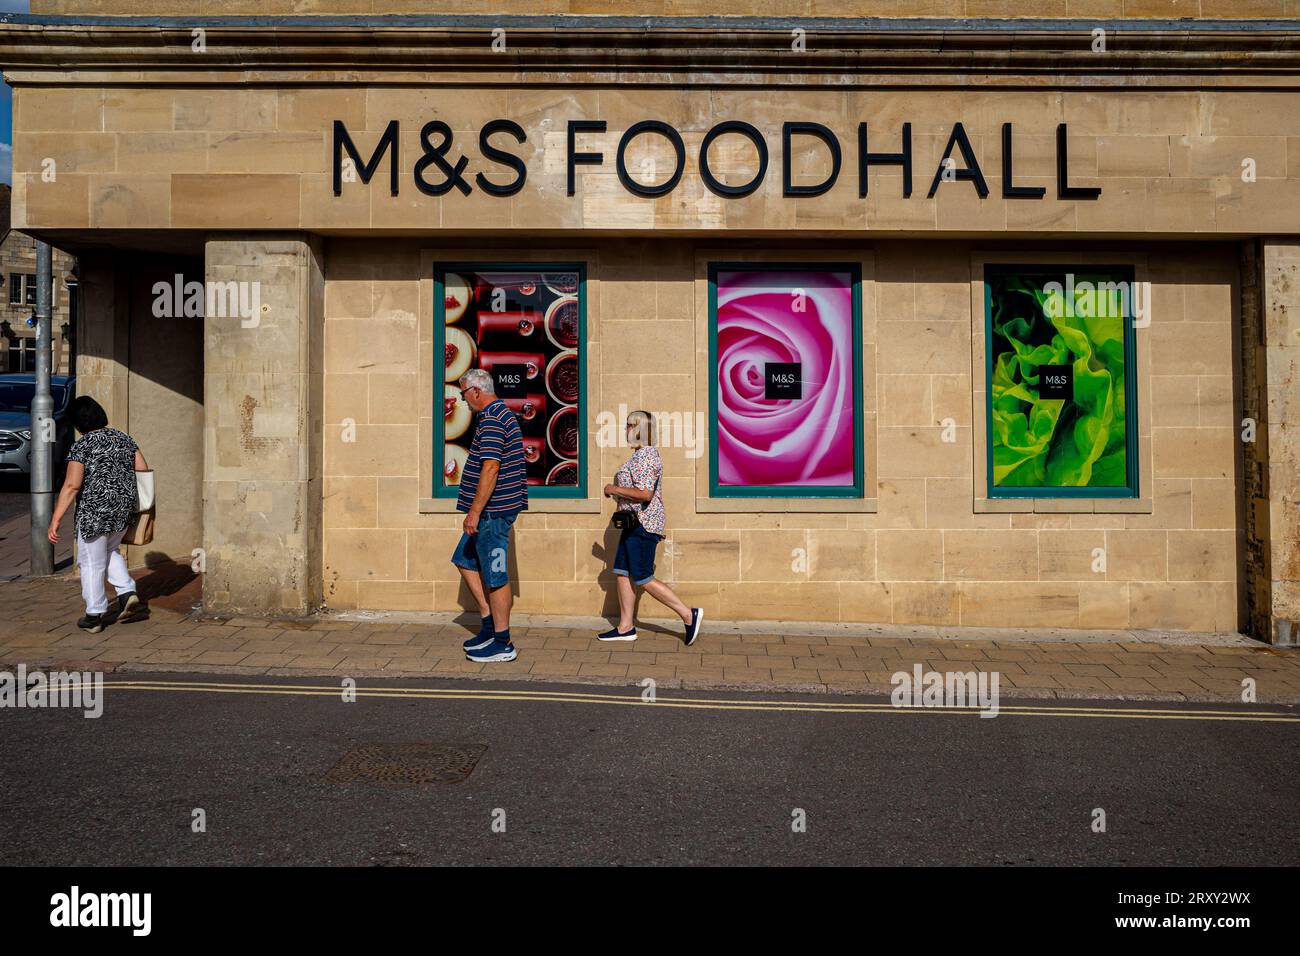 M&S Foodhall store in Stamford, Lincolnshire. Stock Photo